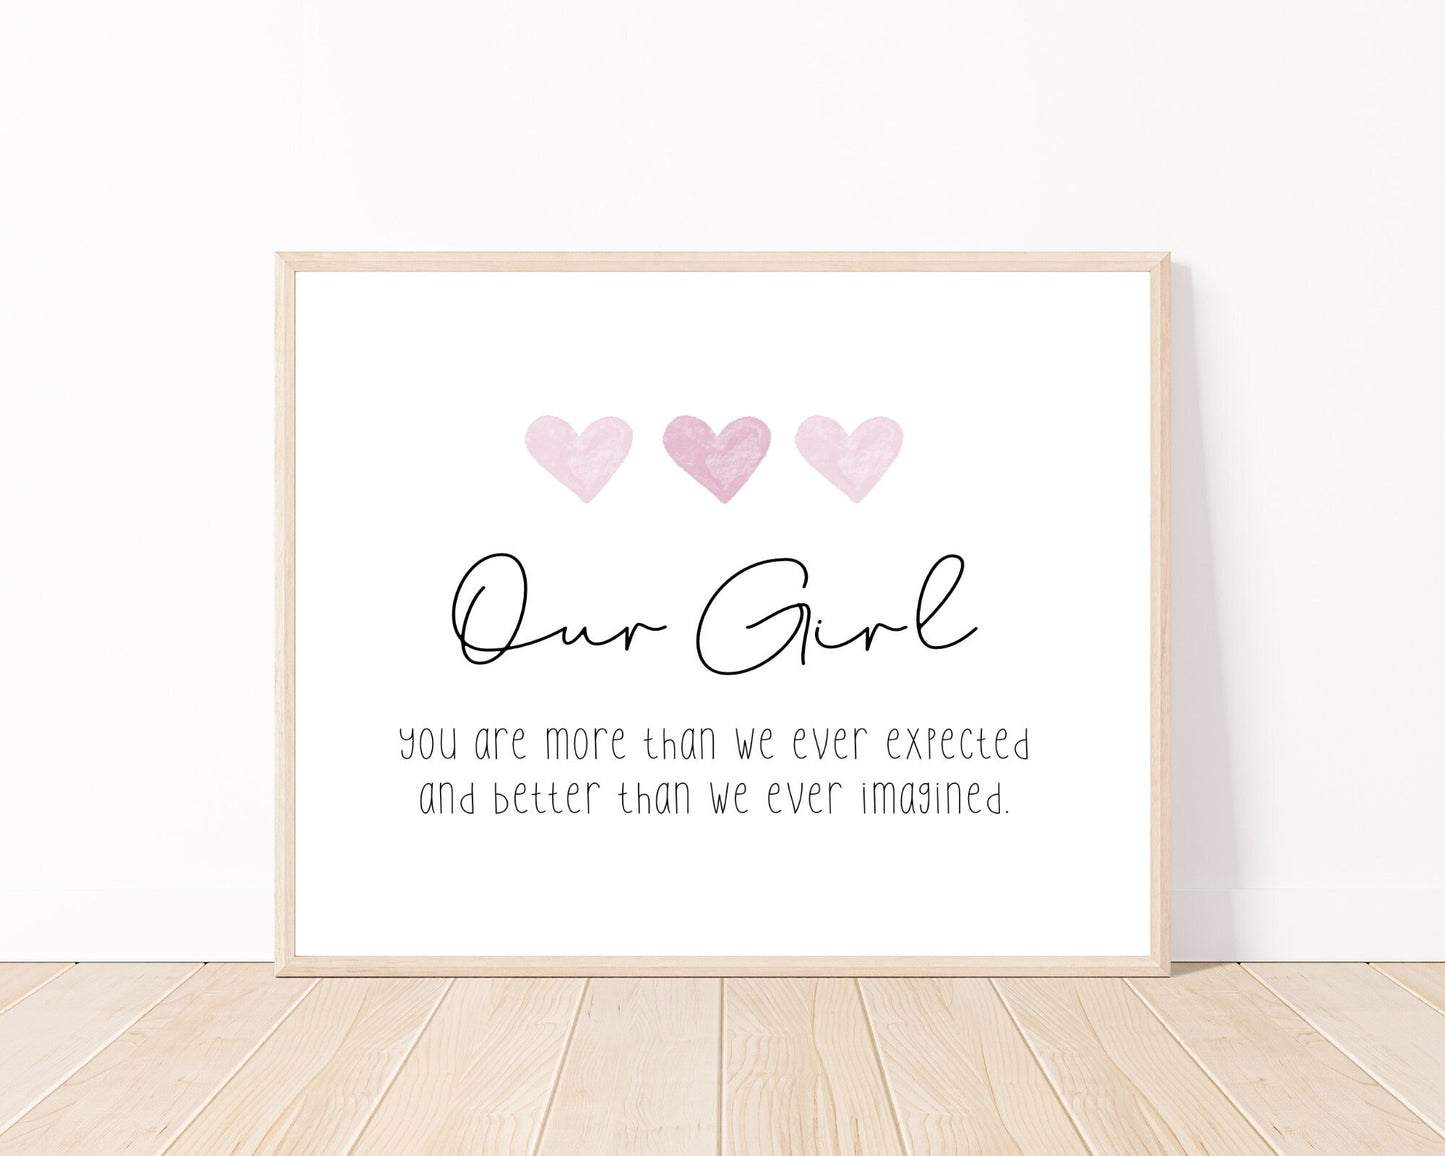 A little girl’s room digital print placed on a white wall and parquet flooring that has three pink hearts at the top, and a piece of writing that says: “Our girl, you are more than we ever expected and better than we ever imagined.”